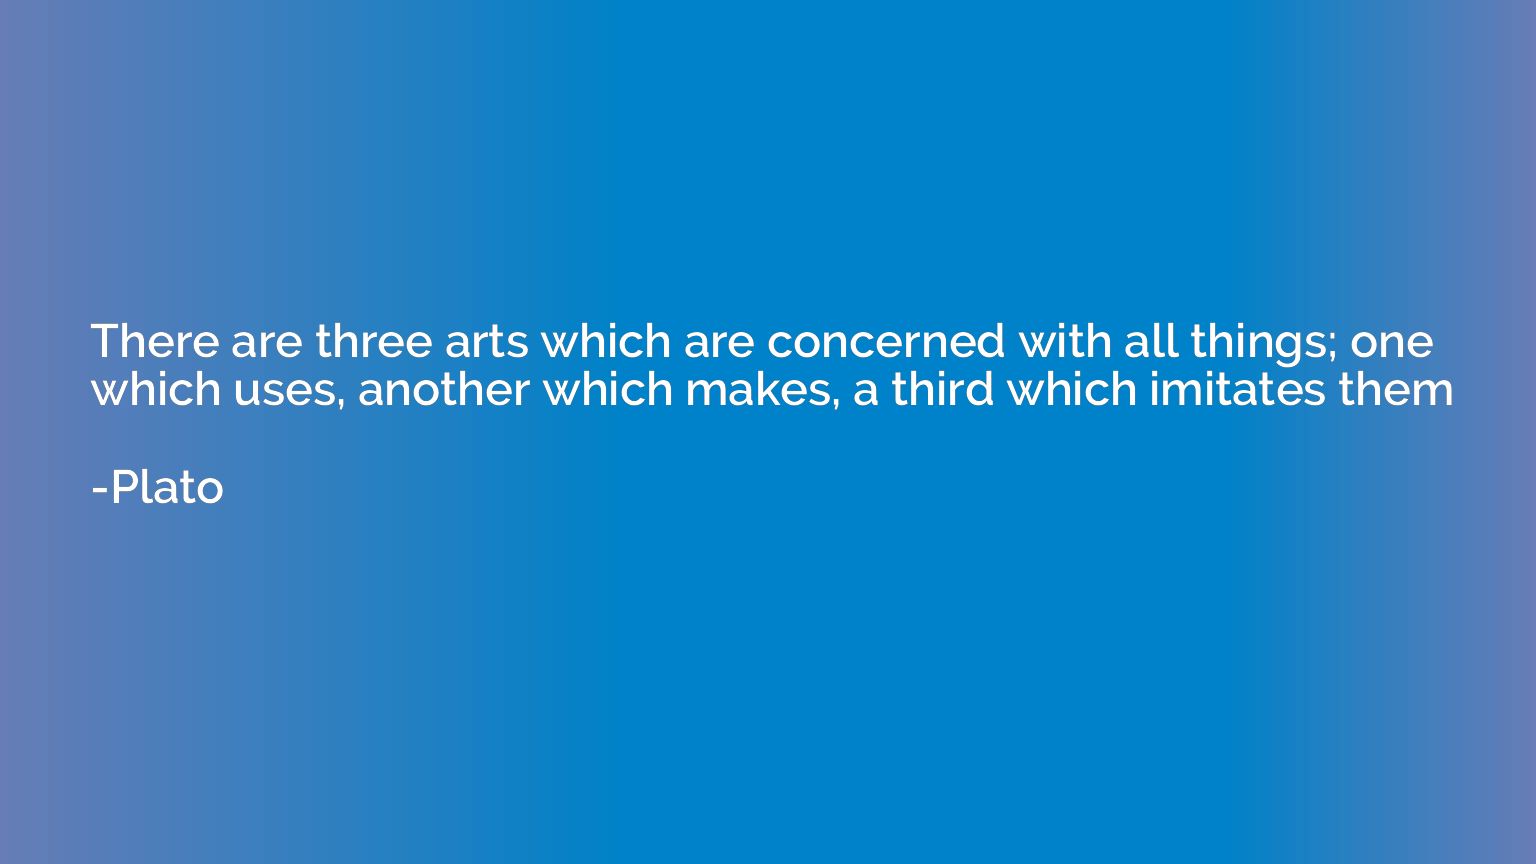 There are three arts which are concerned with all things; on